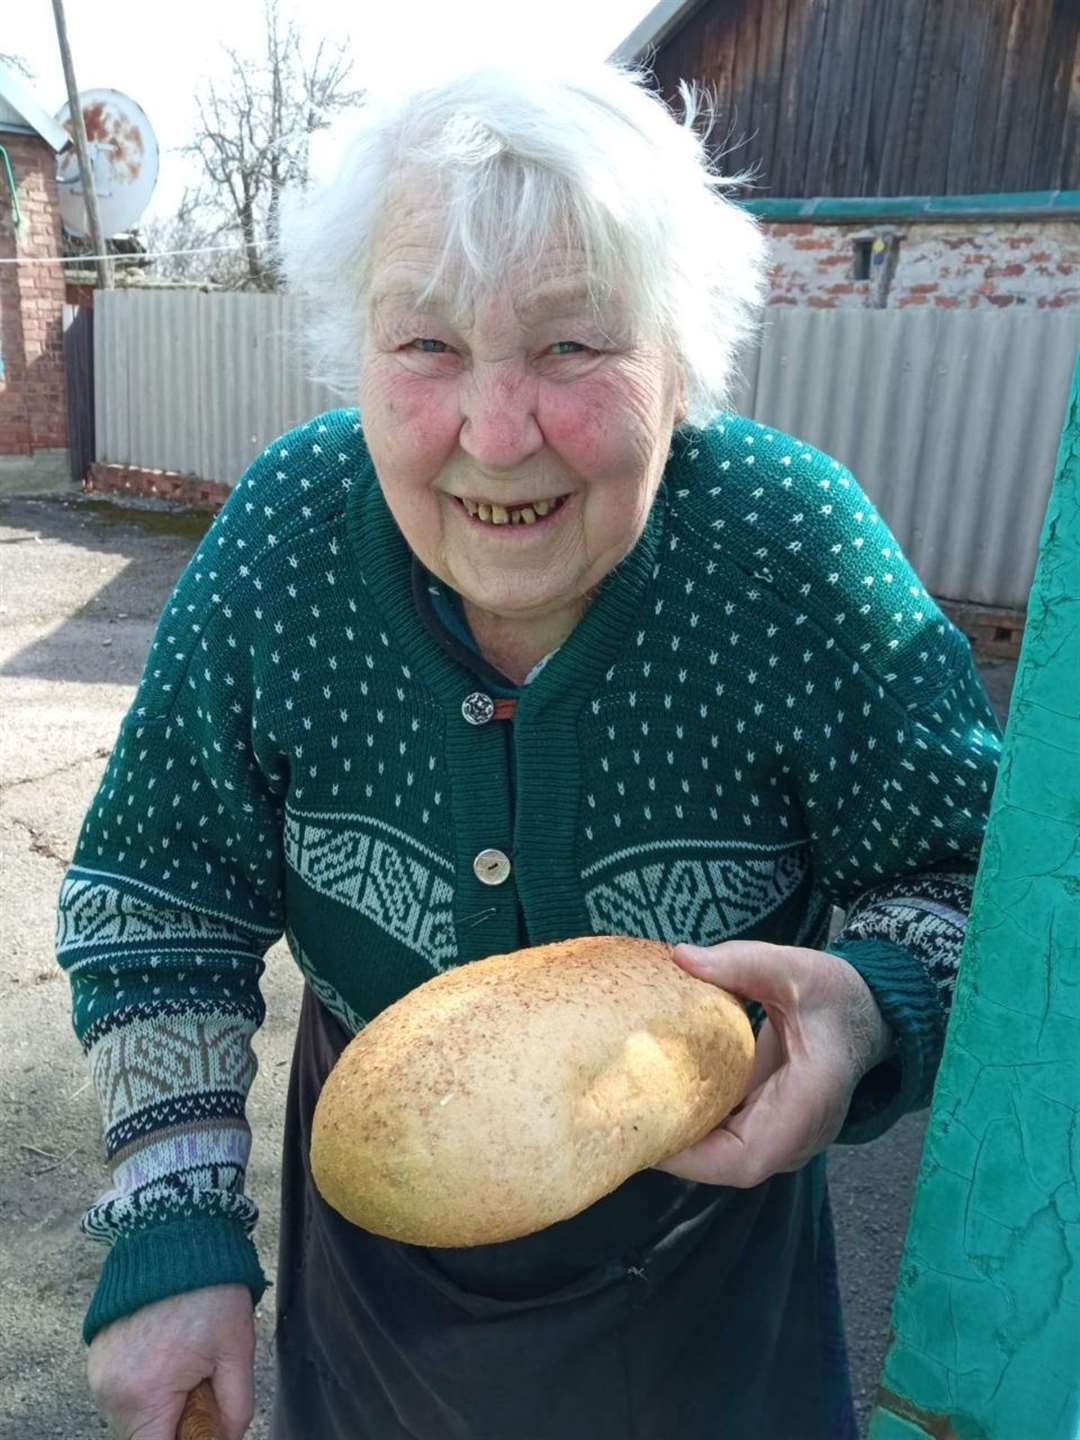 HelpAge International volunteers support older men and women in many settlements in Donetsk and Luhansk regions, bringing bread, water and offering support. Picture: HelpAge International